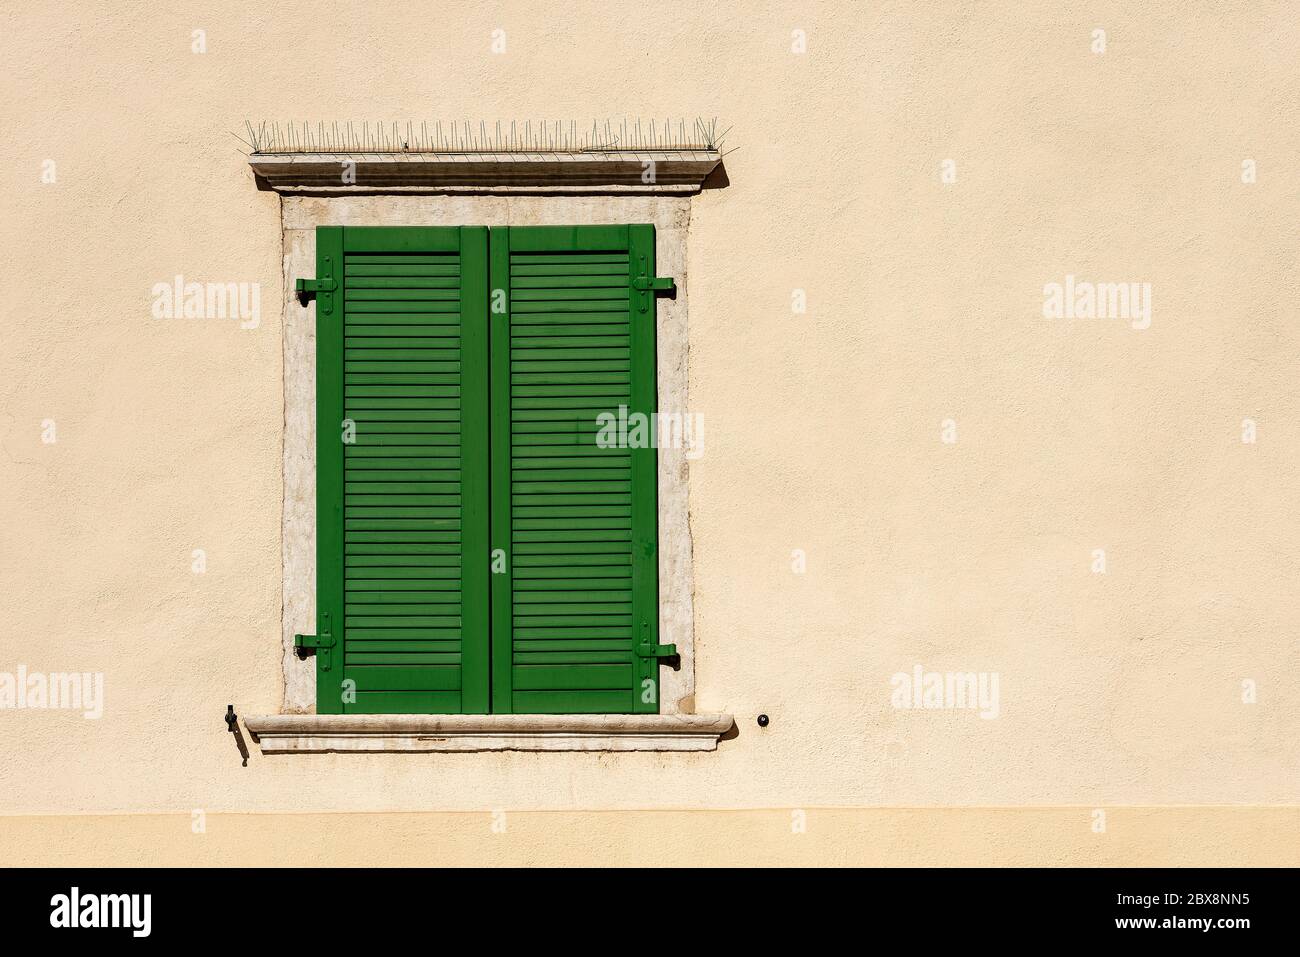 Close-up of a window with closed green wooden shutters with spike steel sticks to prevent birds from stopping, especially pigeons. Stock Photo